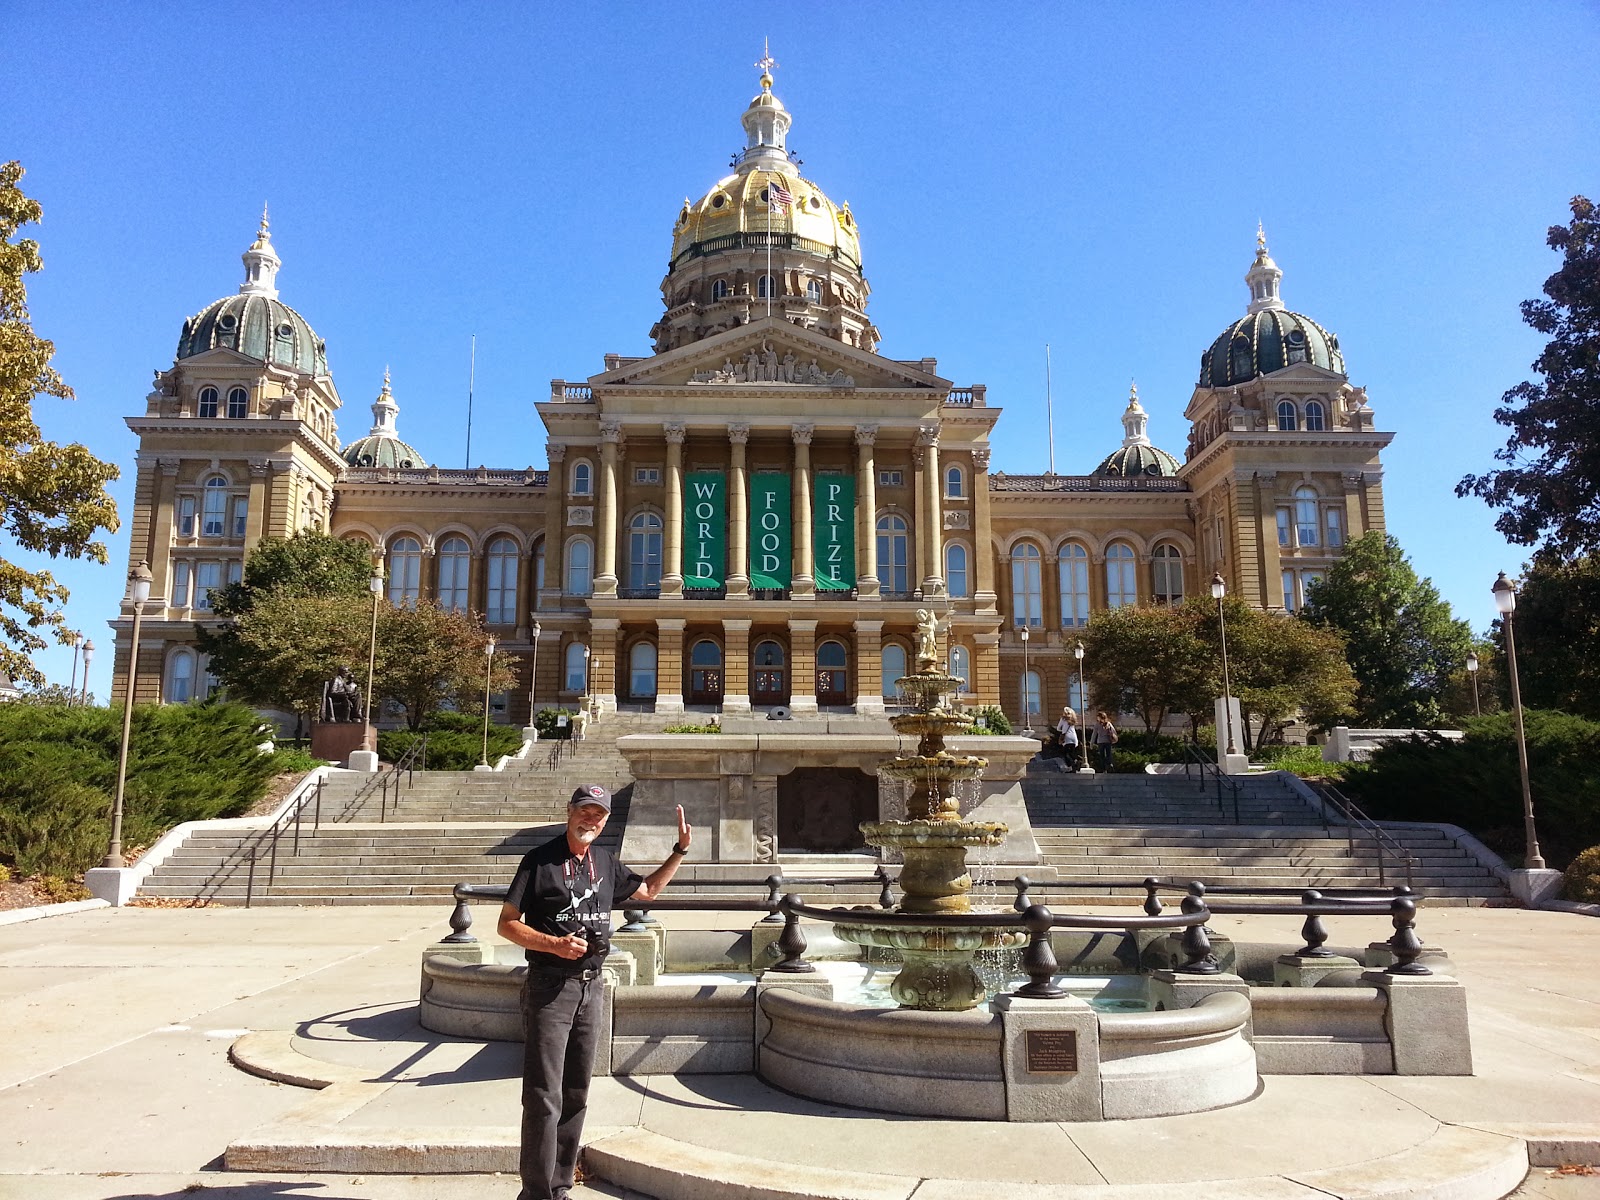 Jan in front of the Iowa State Capitol.